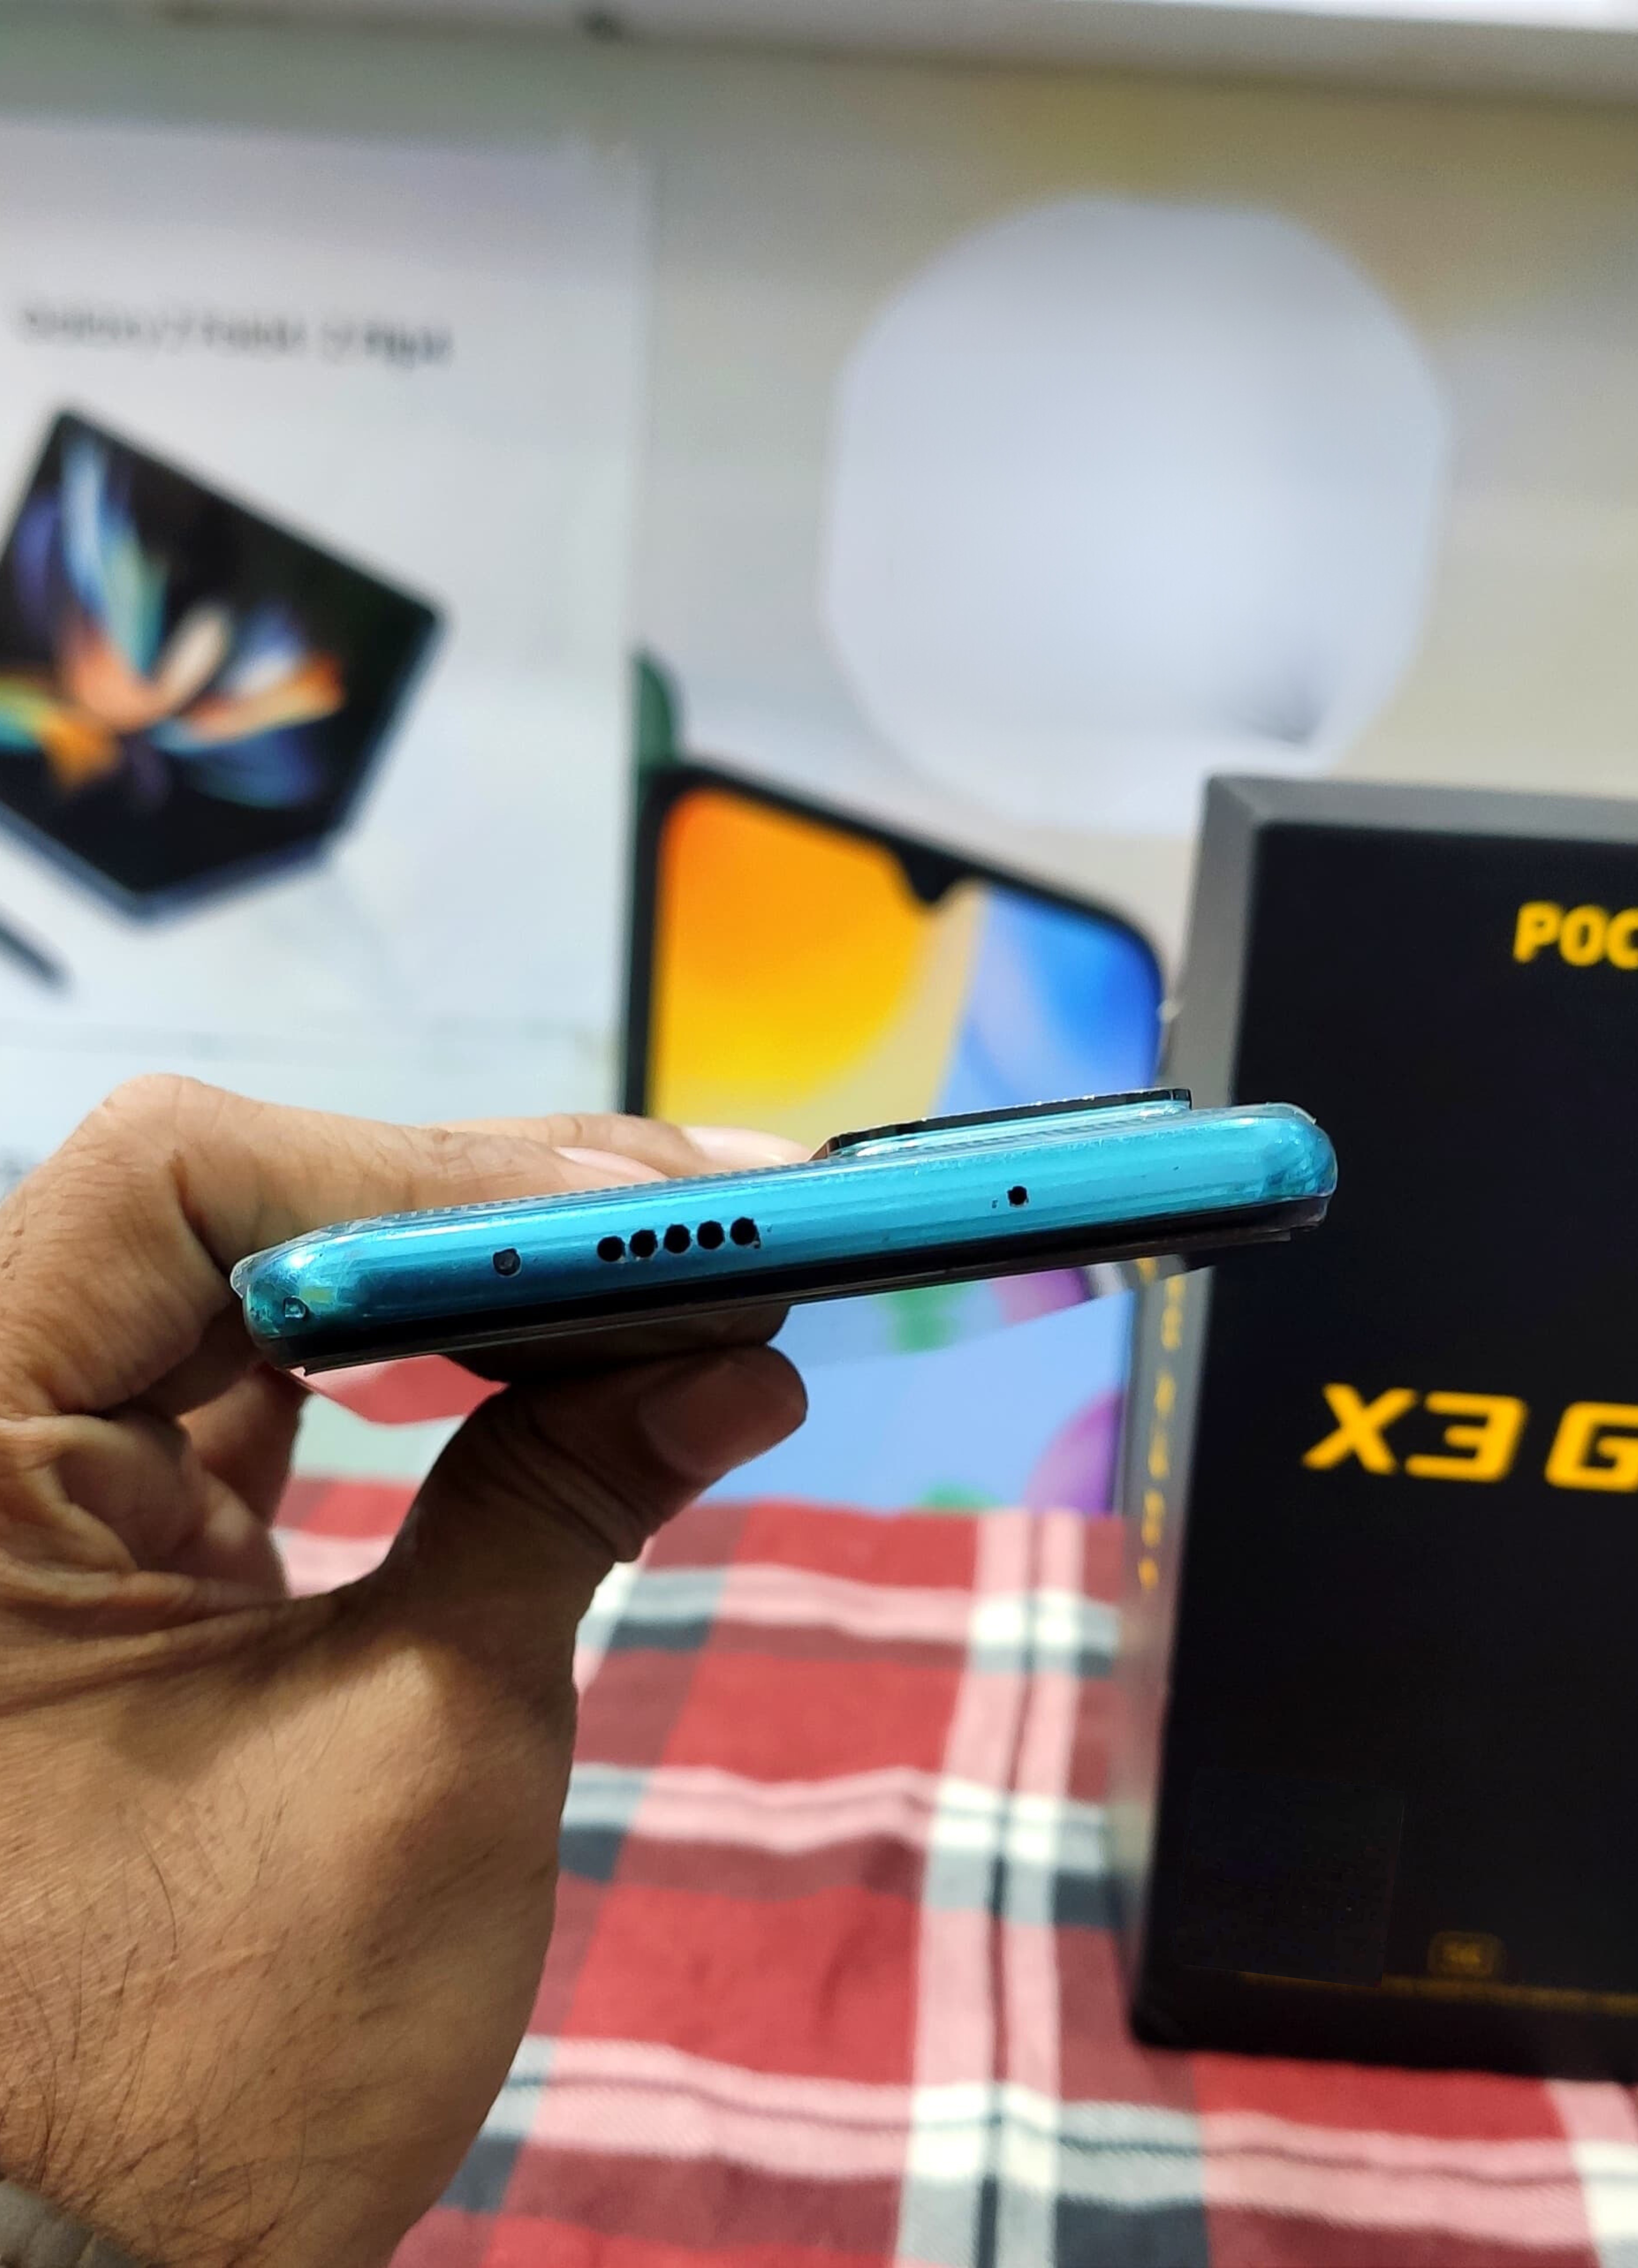 GAMING MOBILE - POCO X3 GT (8,256)